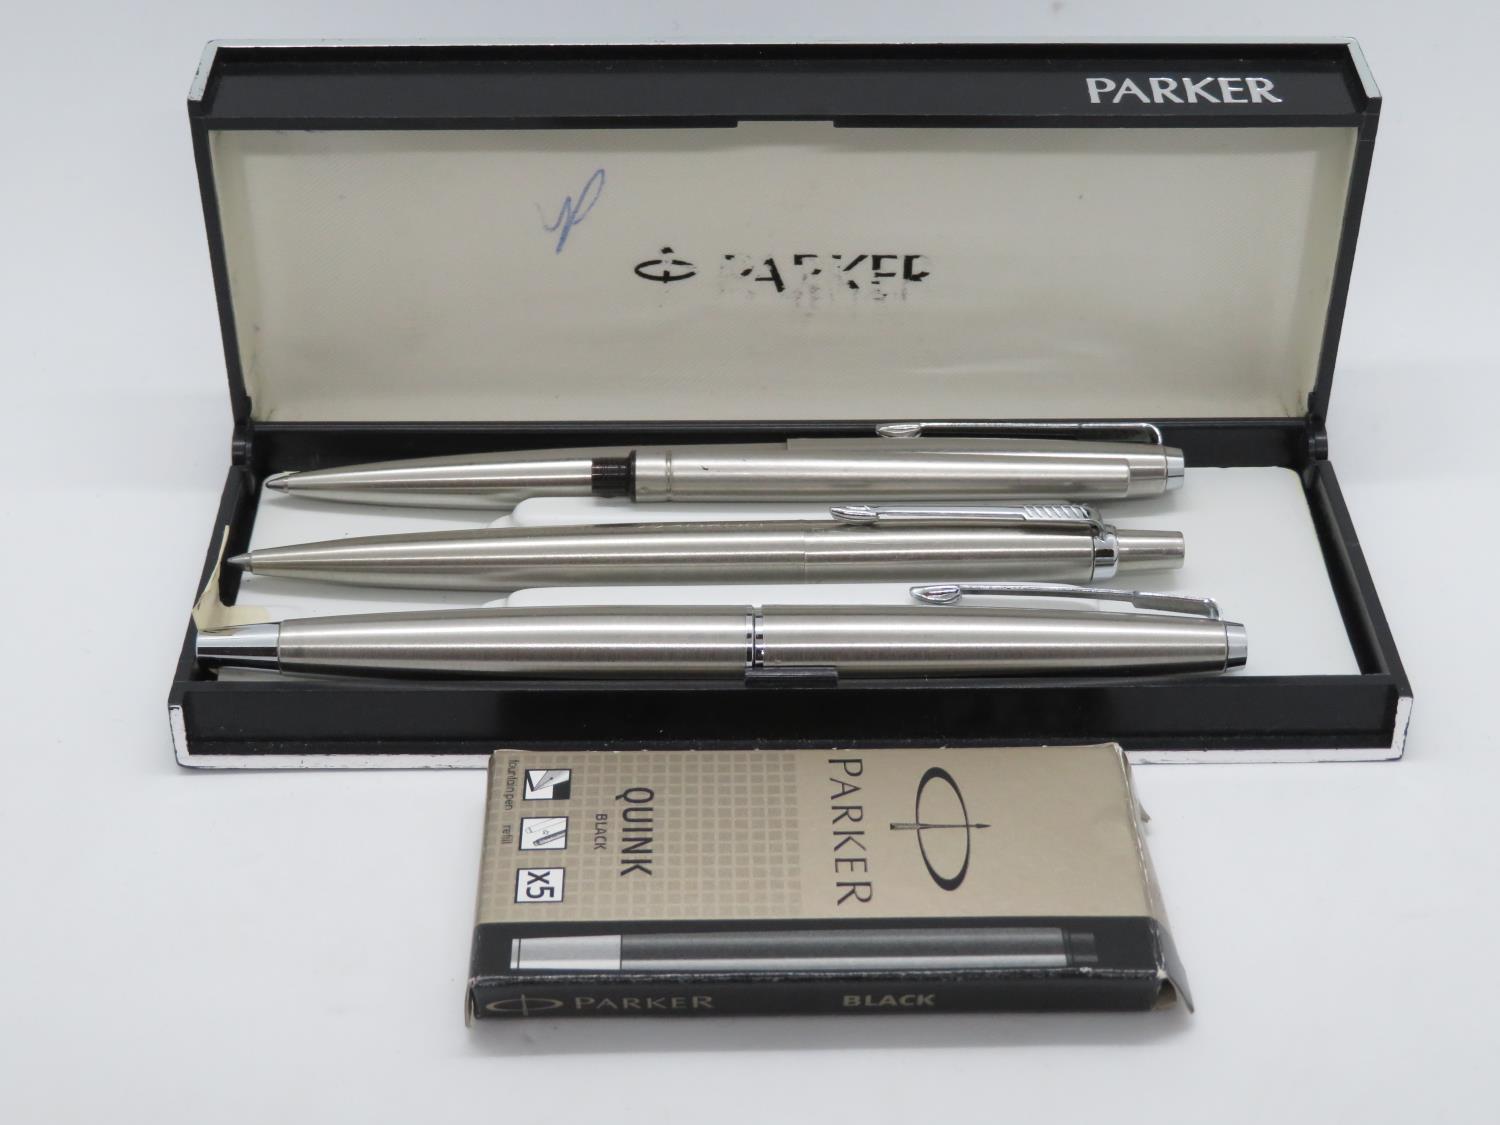 3x Parker pens - 1x fountain and 2x ballpoint